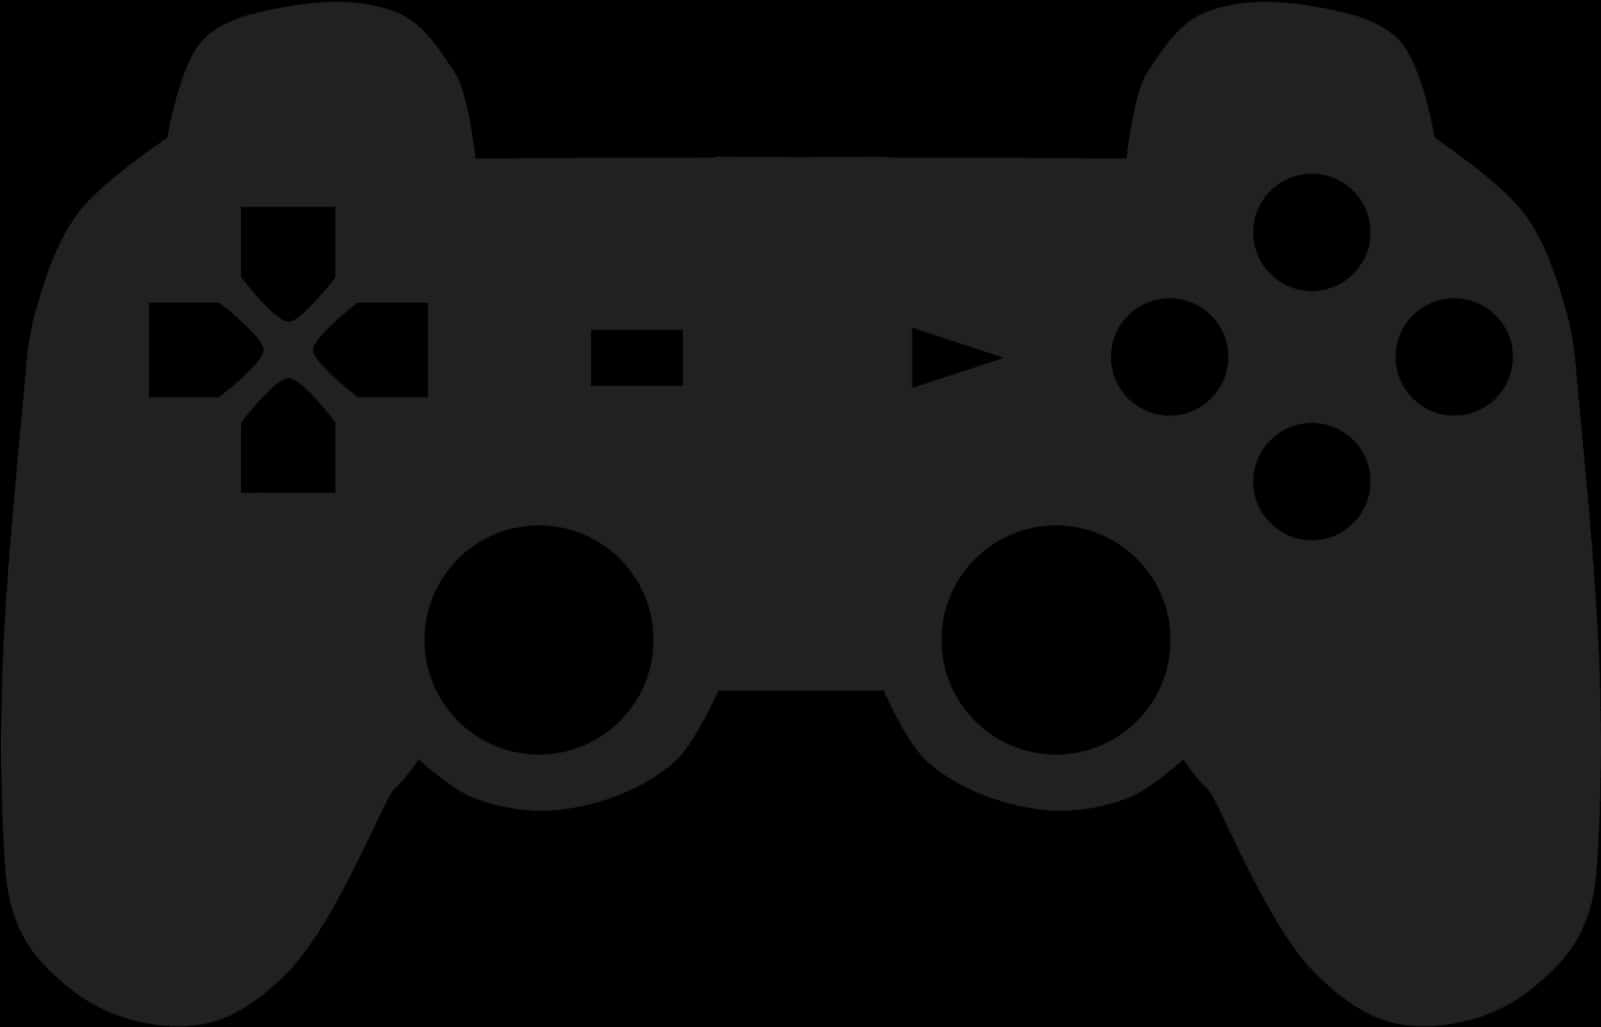 Generic Game Controller Silhouette PNG